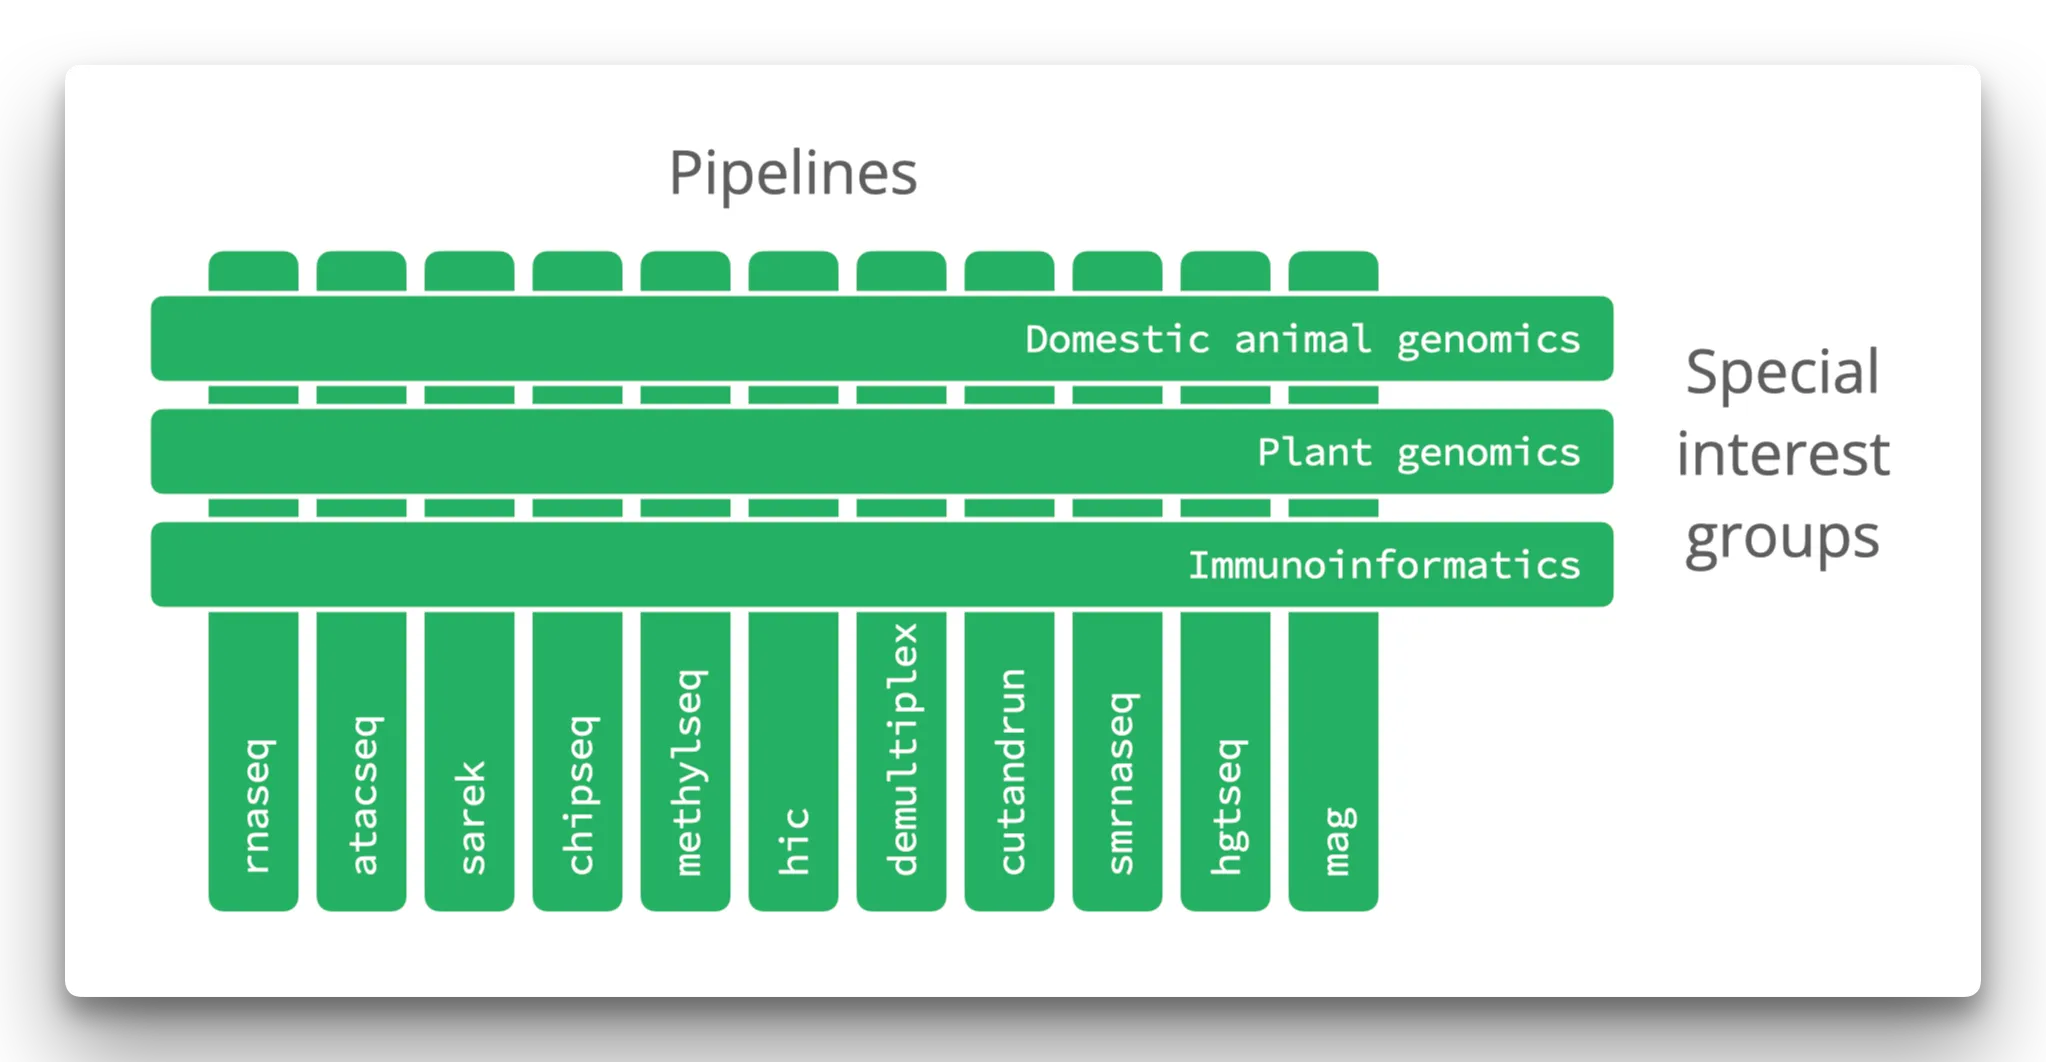 Cross-functional pipelines and interest group structure